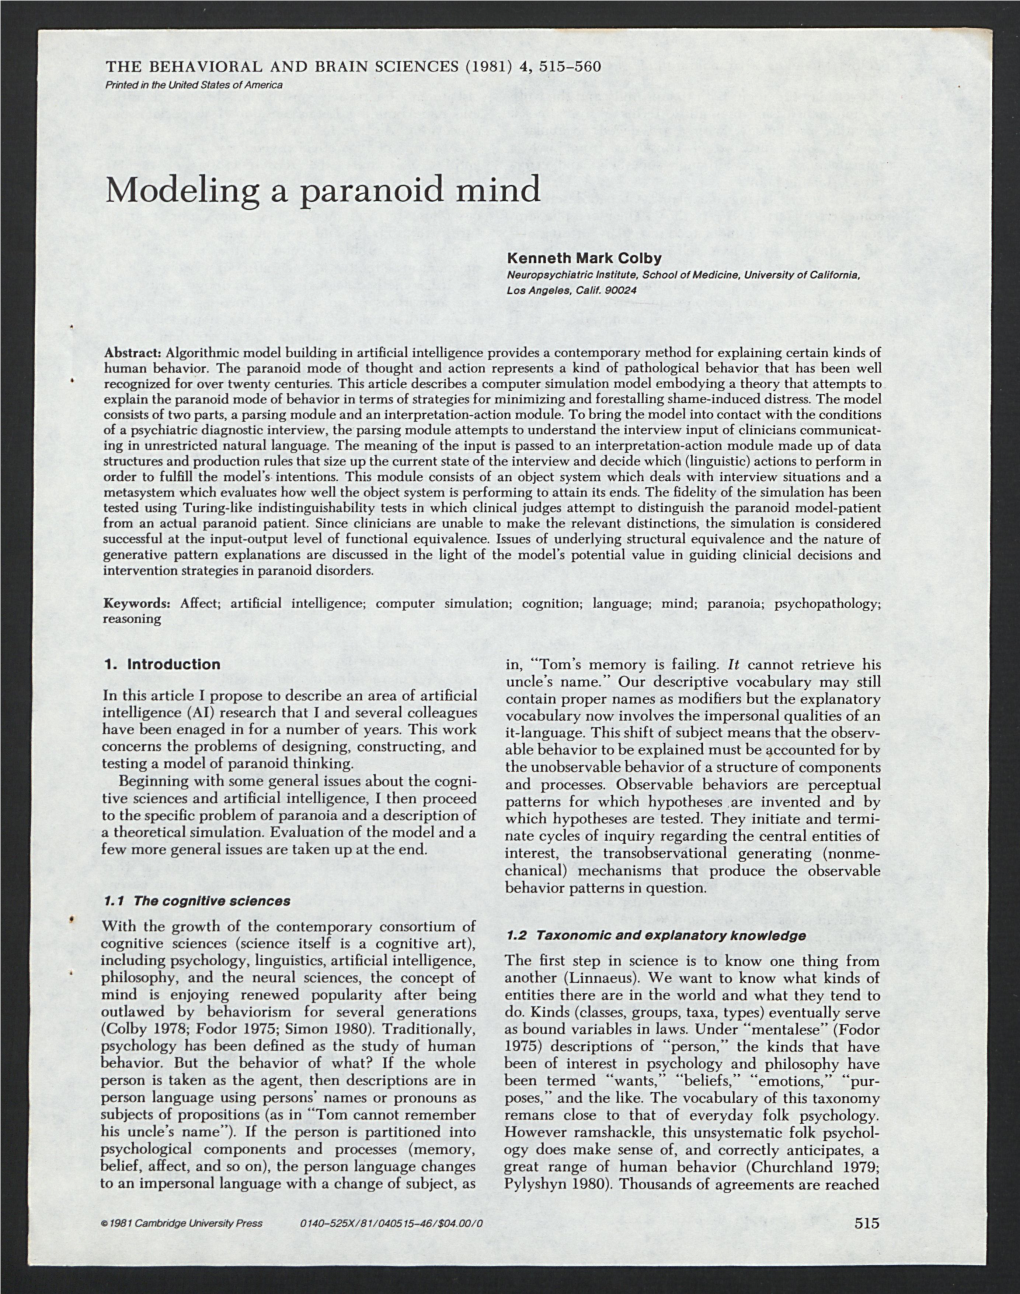 Modeling a Paranoid Mind